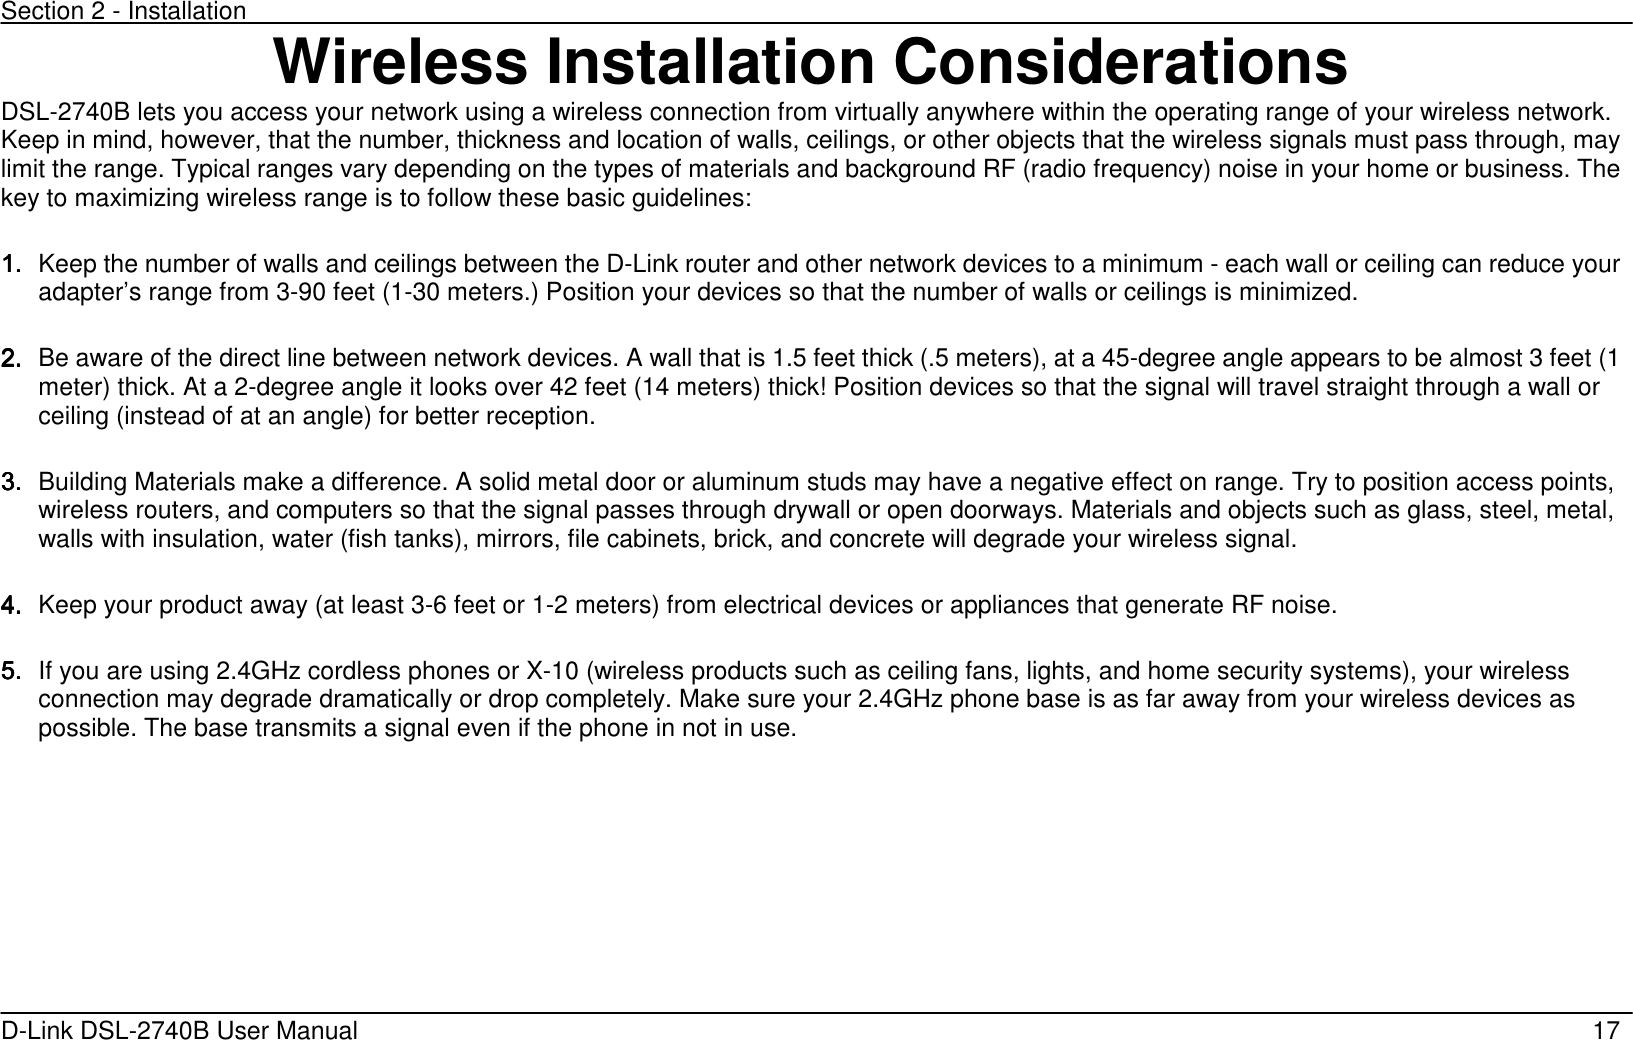 Section 2 - Installation   D-Link DSL-2740B User Manual                                                  17 Wireless Installation Considerations DSL-2740B lets you access your network using a wireless connection from virtually anywhere within the operating range of your wireless network. Keep in mind, however, that the number, thickness and location of walls, ceilings, or other objects that the wireless signals must pass through, may limit the range. Typical ranges vary depending on the types of materials and background RF (radio frequency) noise in your home or business. The key to maximizing wireless range is to follow these basic guidelines:    1.1.1.1. Keep the number of walls and ceilings between the D-Link router and other network devices to a minimum - each wall or ceiling can reduce your adapter’s range from 3-90 feet (1-30 meters.) Position your devices so that the number of walls or ceilings is minimized.    2.2.2.2. Be aware of the direct line between network devices. A wall that is 1.5 feet thick (.5 meters), at a 45-degree angle appears to be almost 3 feet (1 meter) thick. At a 2-degree angle it looks over 42 feet (14 meters) thick! Position devices so that the signal will travel straight through a wall or ceiling (instead of at an angle) for better reception.  3.3.3.3. Building Materials make a difference. A solid metal door or aluminum studs may have a negative effect on range. Try to position access points, wireless routers, and computers so that the signal passes through drywall or open doorways. Materials and objects such as glass, steel, metal, walls with insulation, water (fish tanks), mirrors, file cabinets, brick, and concrete will degrade your wireless signal.  4.4.4.4. Keep your product away (at least 3-6 feet or 1-2 meters) from electrical devices or appliances that generate RF noise.    5.5.5.5. If you are using 2.4GHz cordless phones or X-10 (wireless products such as ceiling fans, lights, and home security systems), your wireless connection may degrade dramatically or drop completely. Make sure your 2.4GHz phone base is as far away from your wireless devices as possible. The base transmits a signal even if the phone in not in use.  